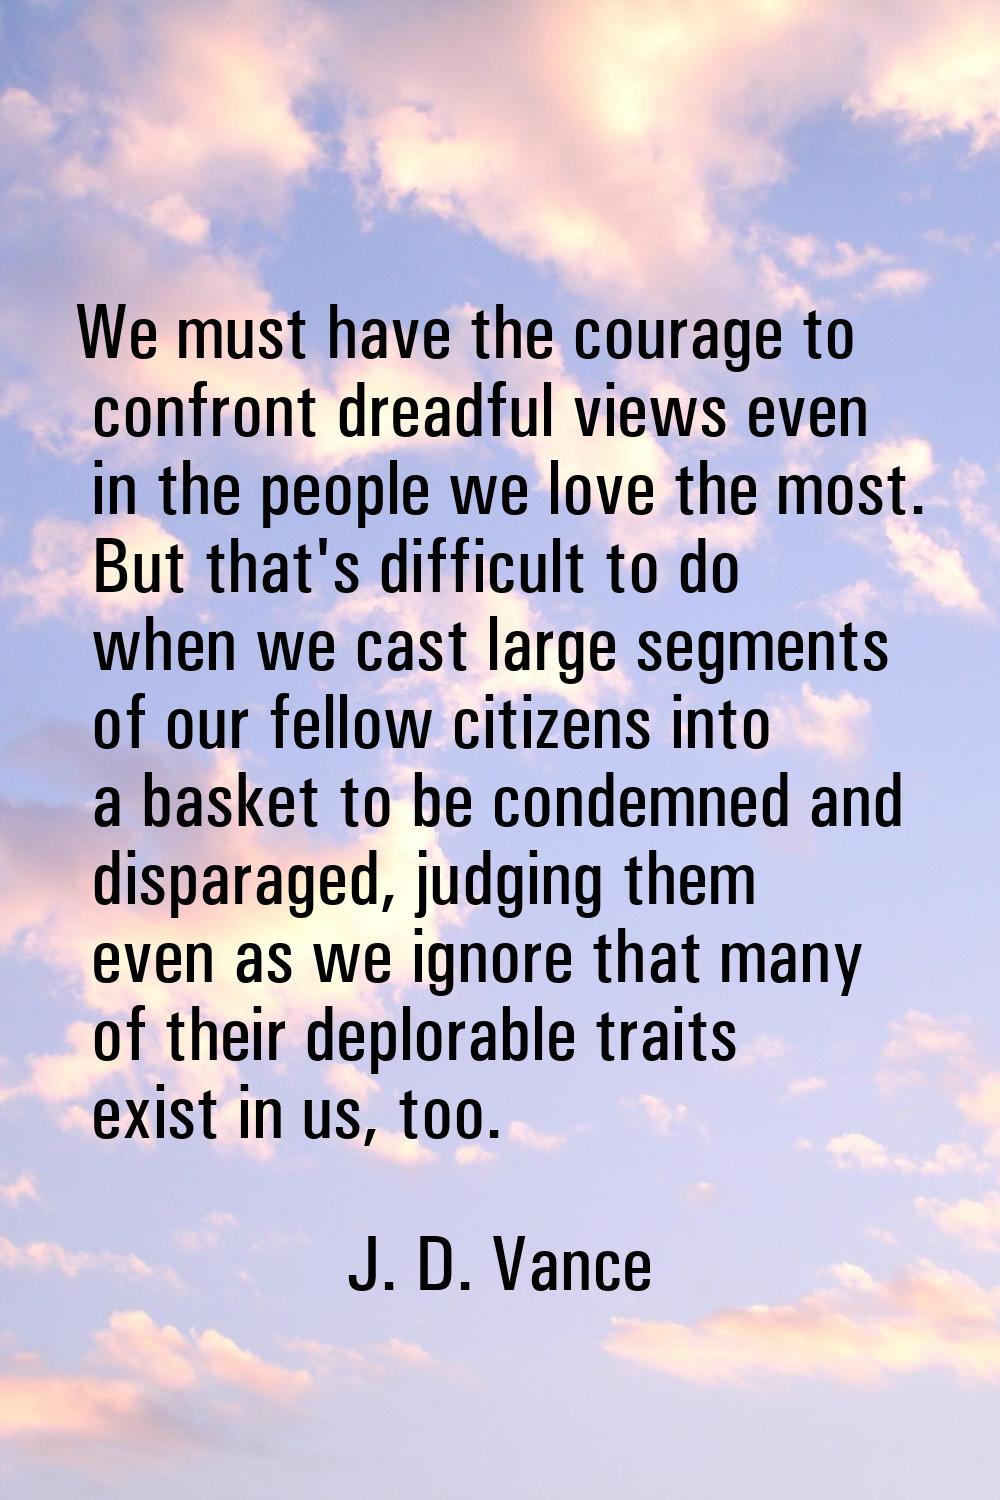 We must have the courage to confront dreadful views even in the people we love the most. But that's